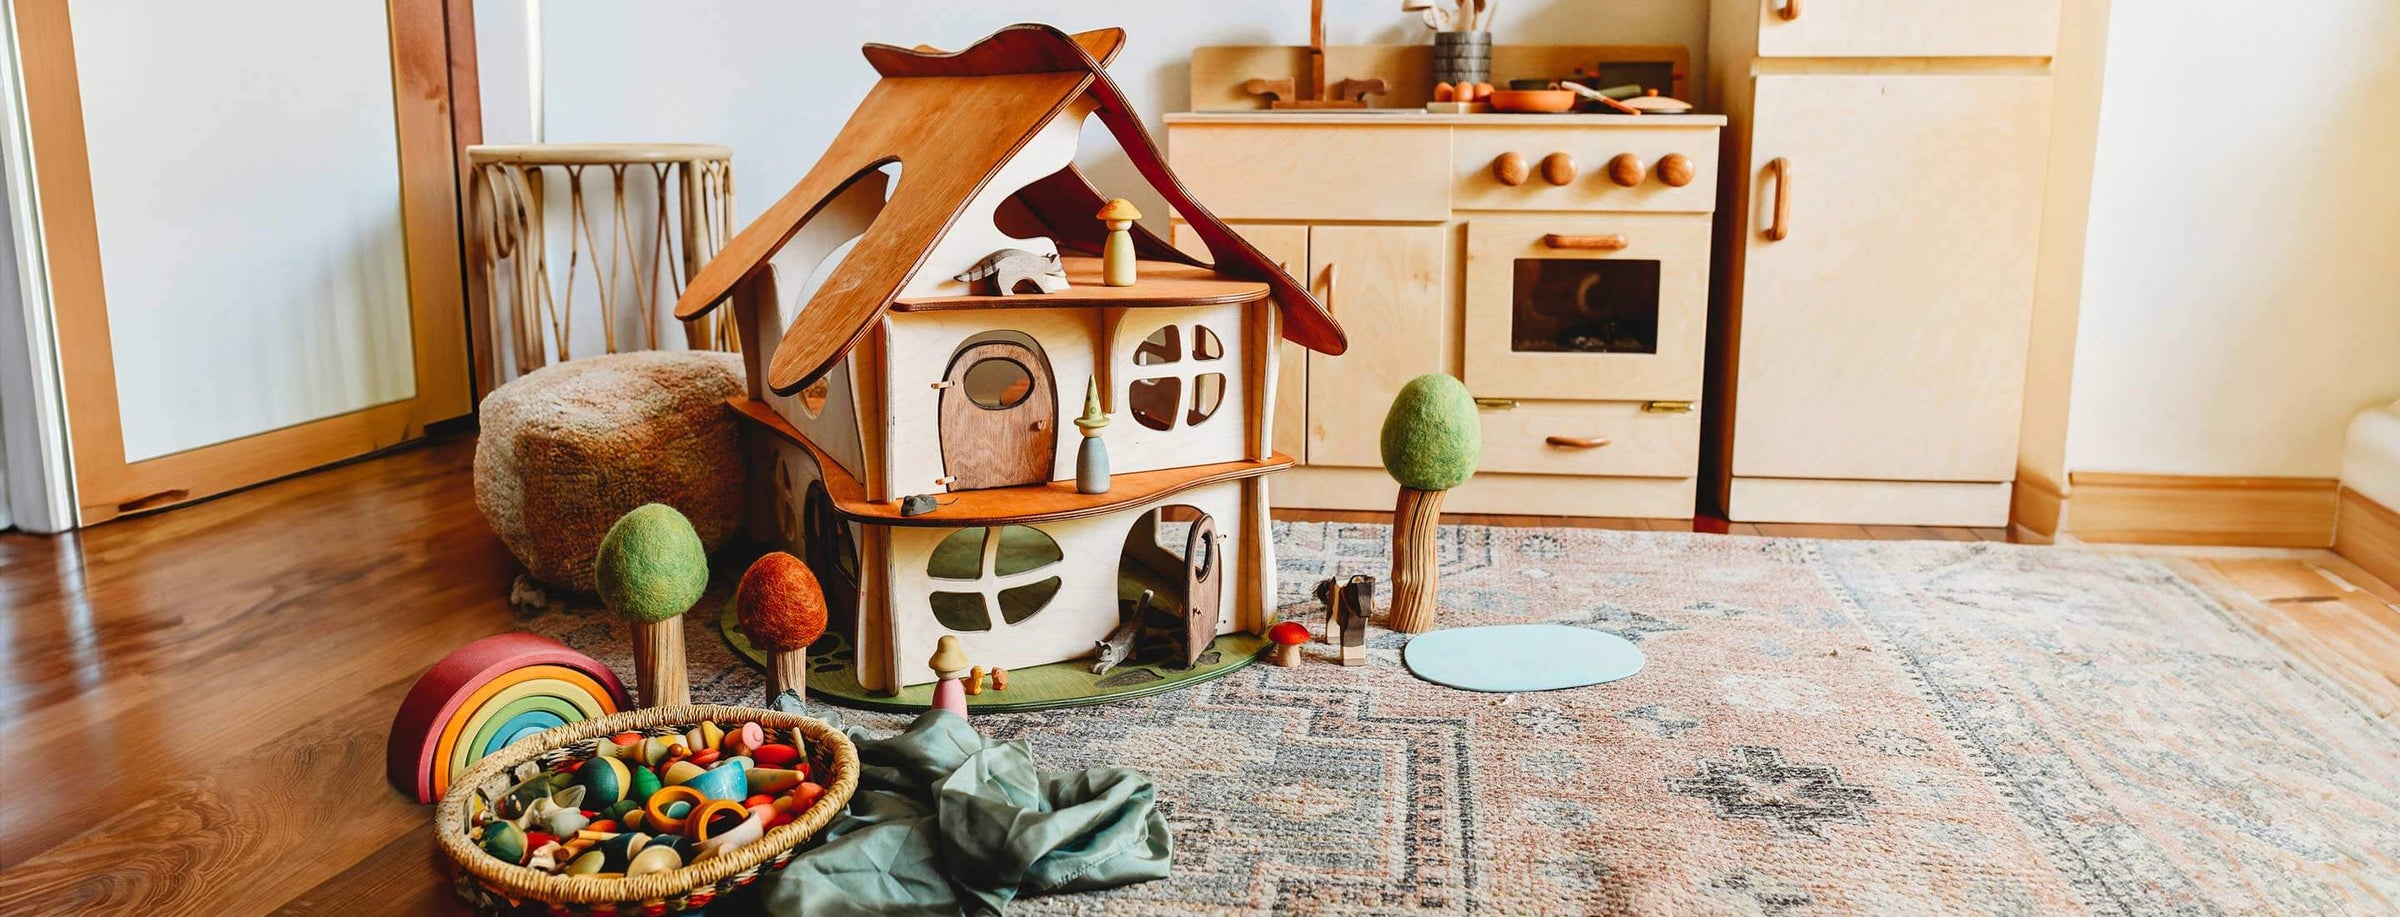 Wooden Dollhouse on rug with felted trees in front of play kitchen and refridgerator